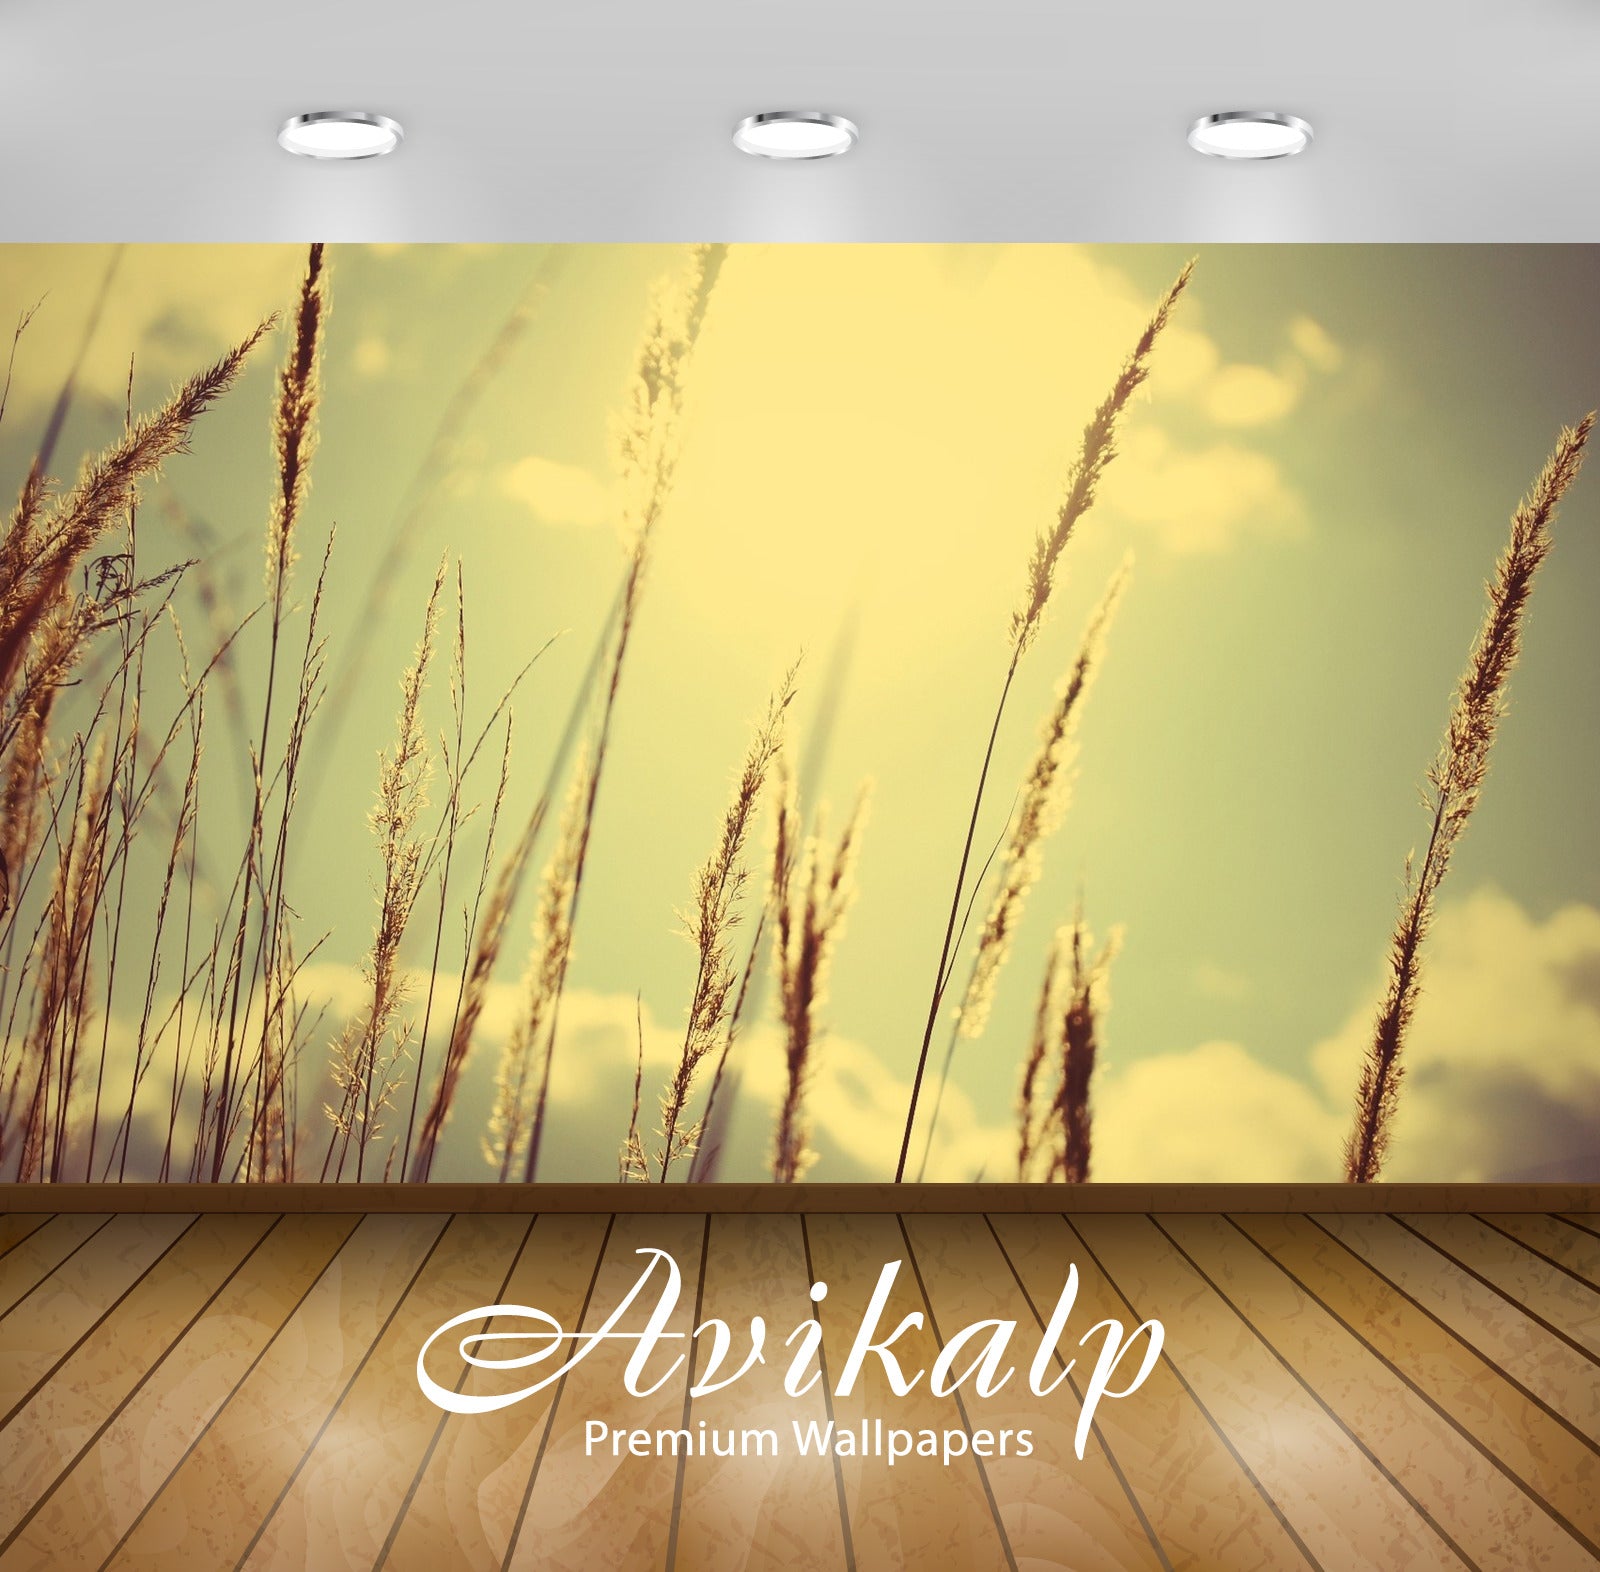 Avikalp Exclusive Awi1291 Crops Full HD Wallpapers for Living room, Hall, Kids Room, Kitchen, TV Bac